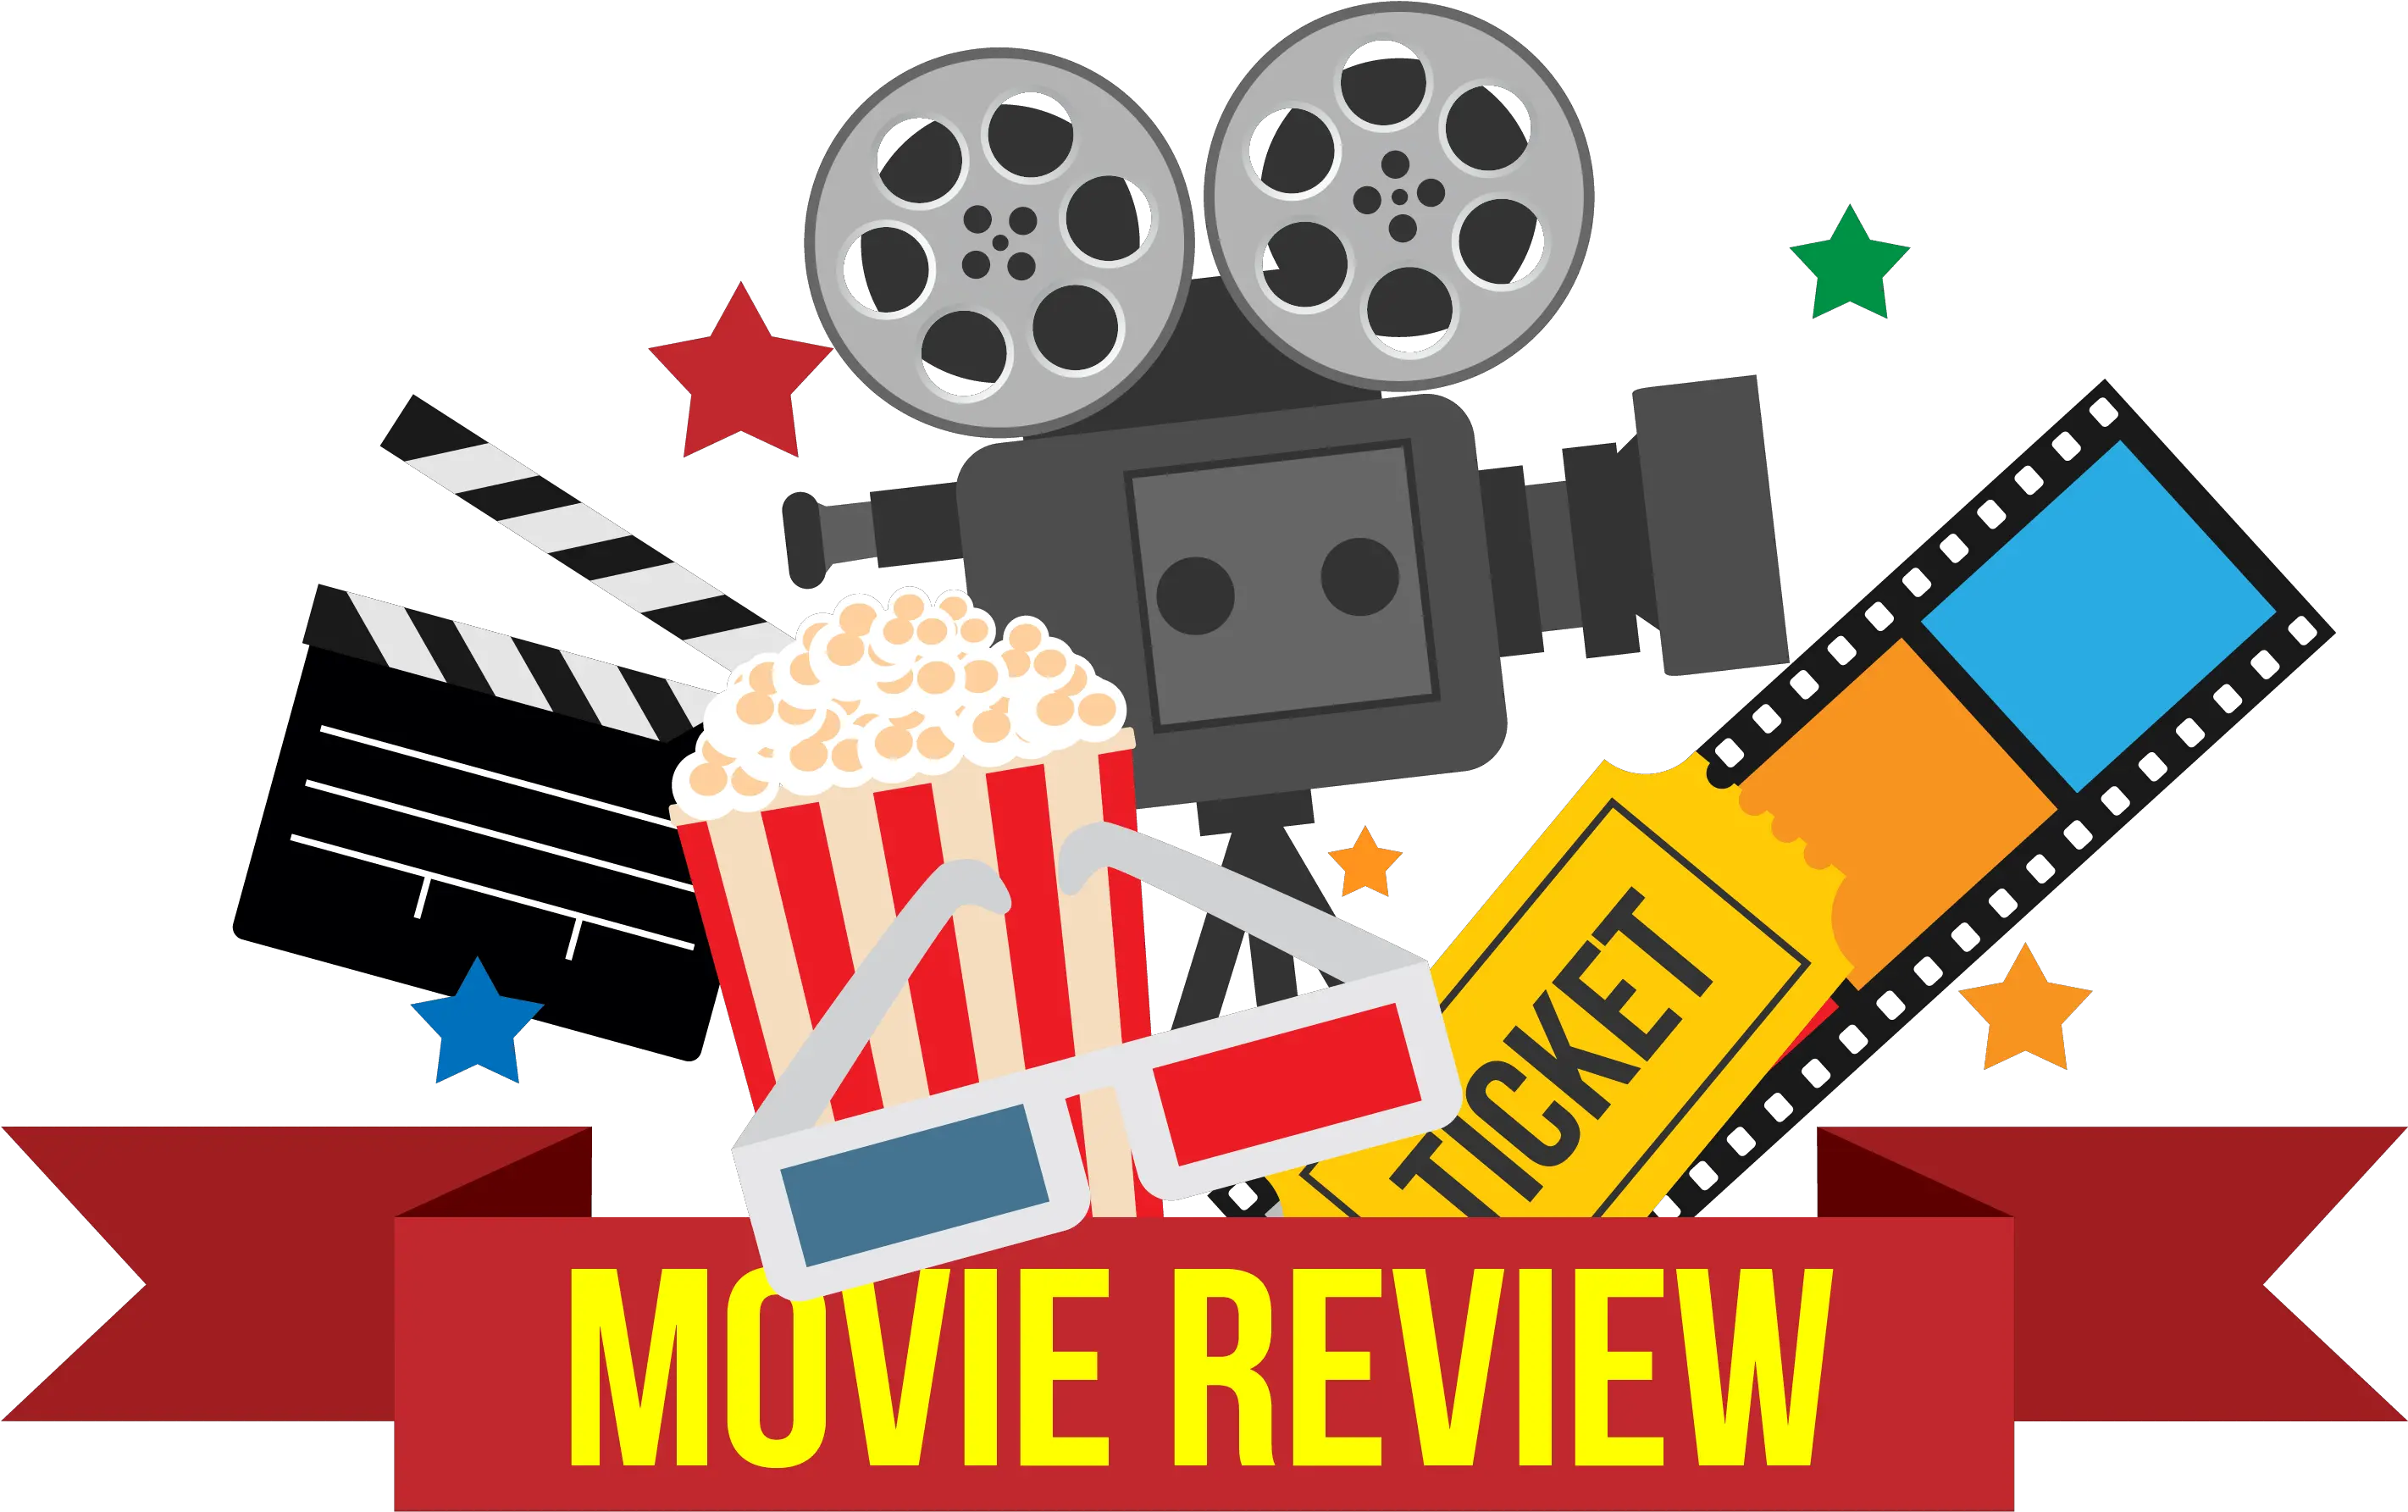 Movie Night Png Transparent Image Movie Review Clip Art Night Png